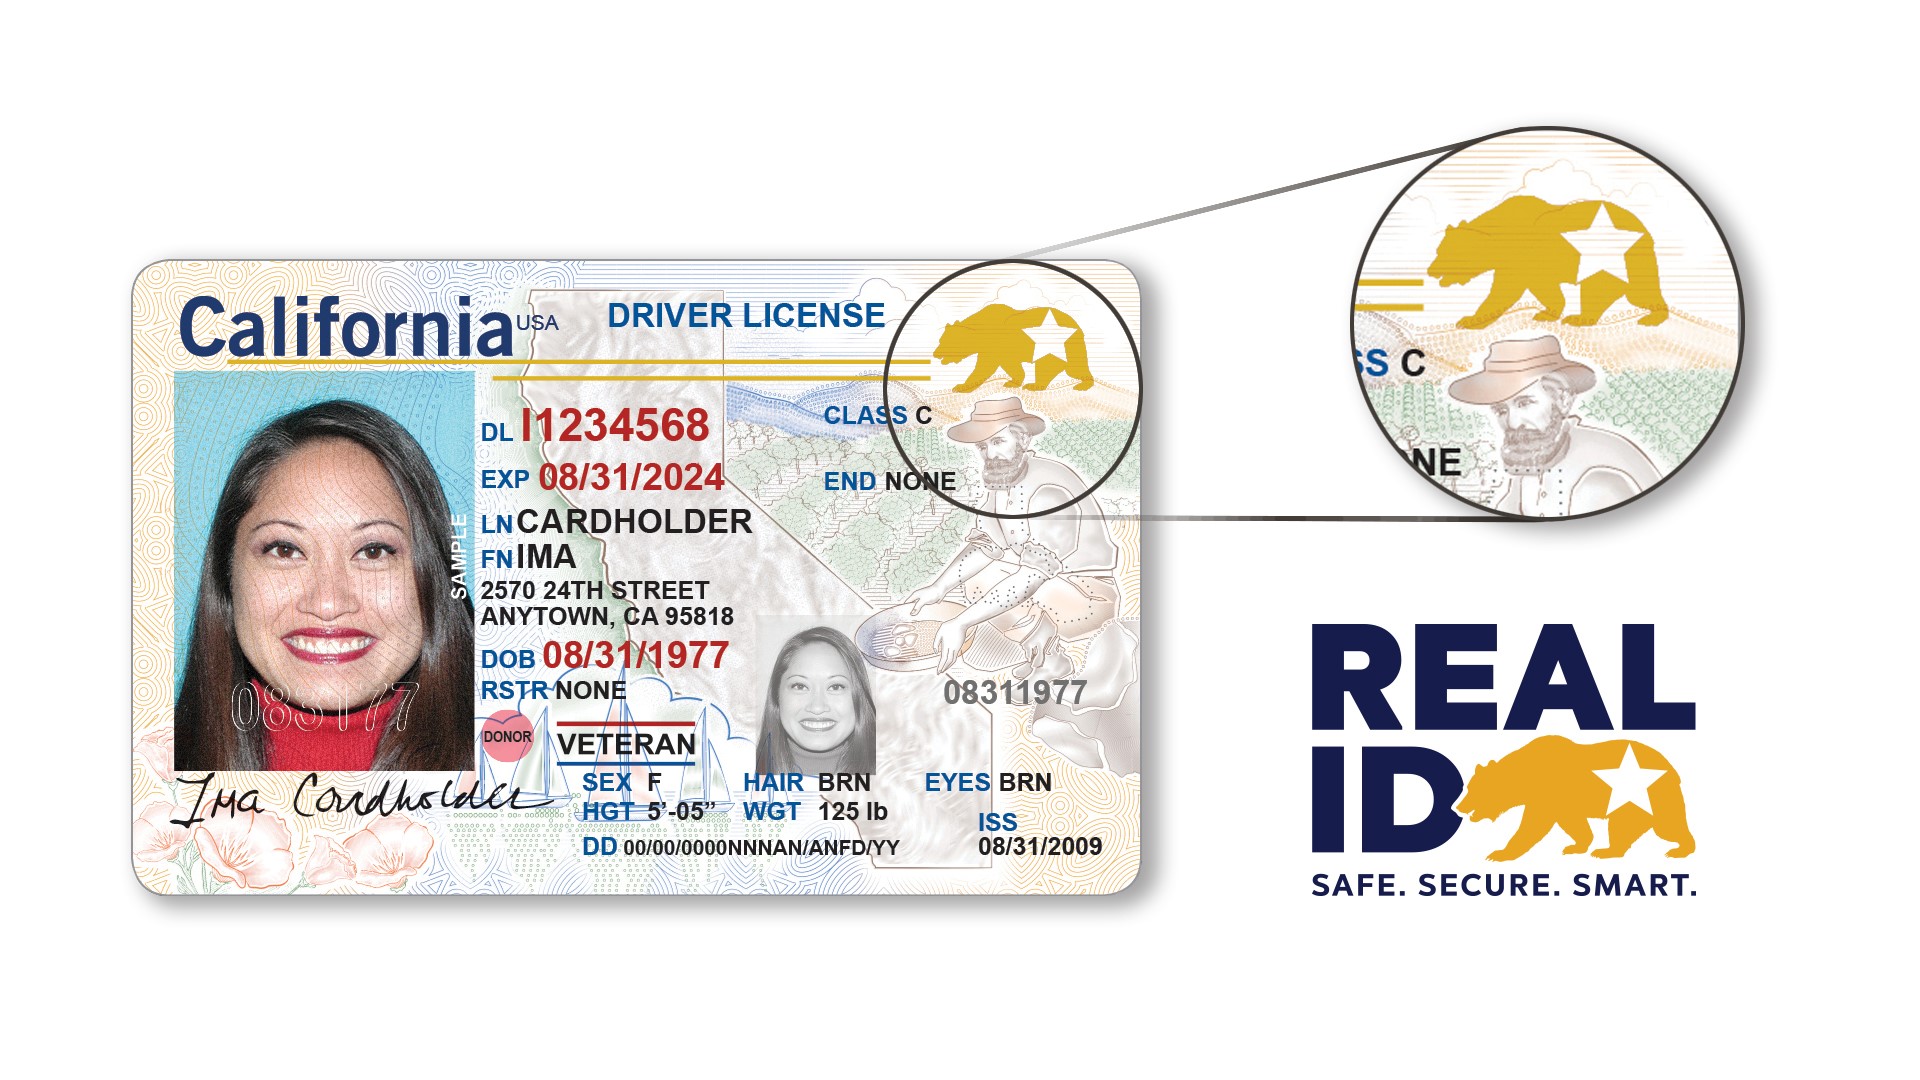 TSA encourages travelers who fly out of Santa Barbara Municipal Airport to get a REAL ID-compliant driver license or identification card